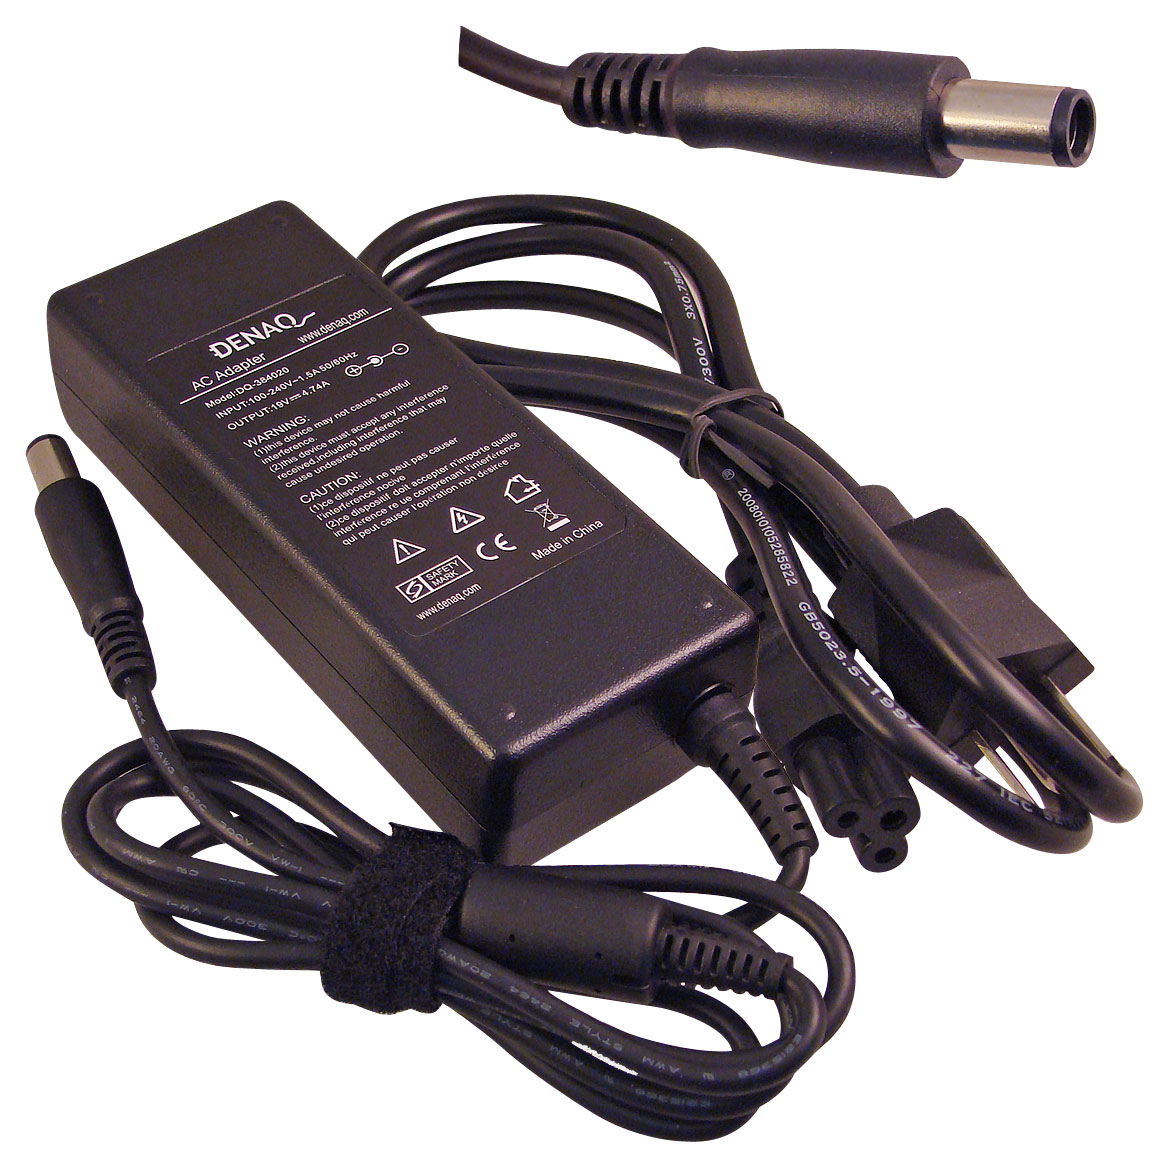 agenda concept tapijt DENAQ AC Power Adapter and Charger for Select HP Laptops and Tablets Black  DQ-384020-7450 - Best Buy